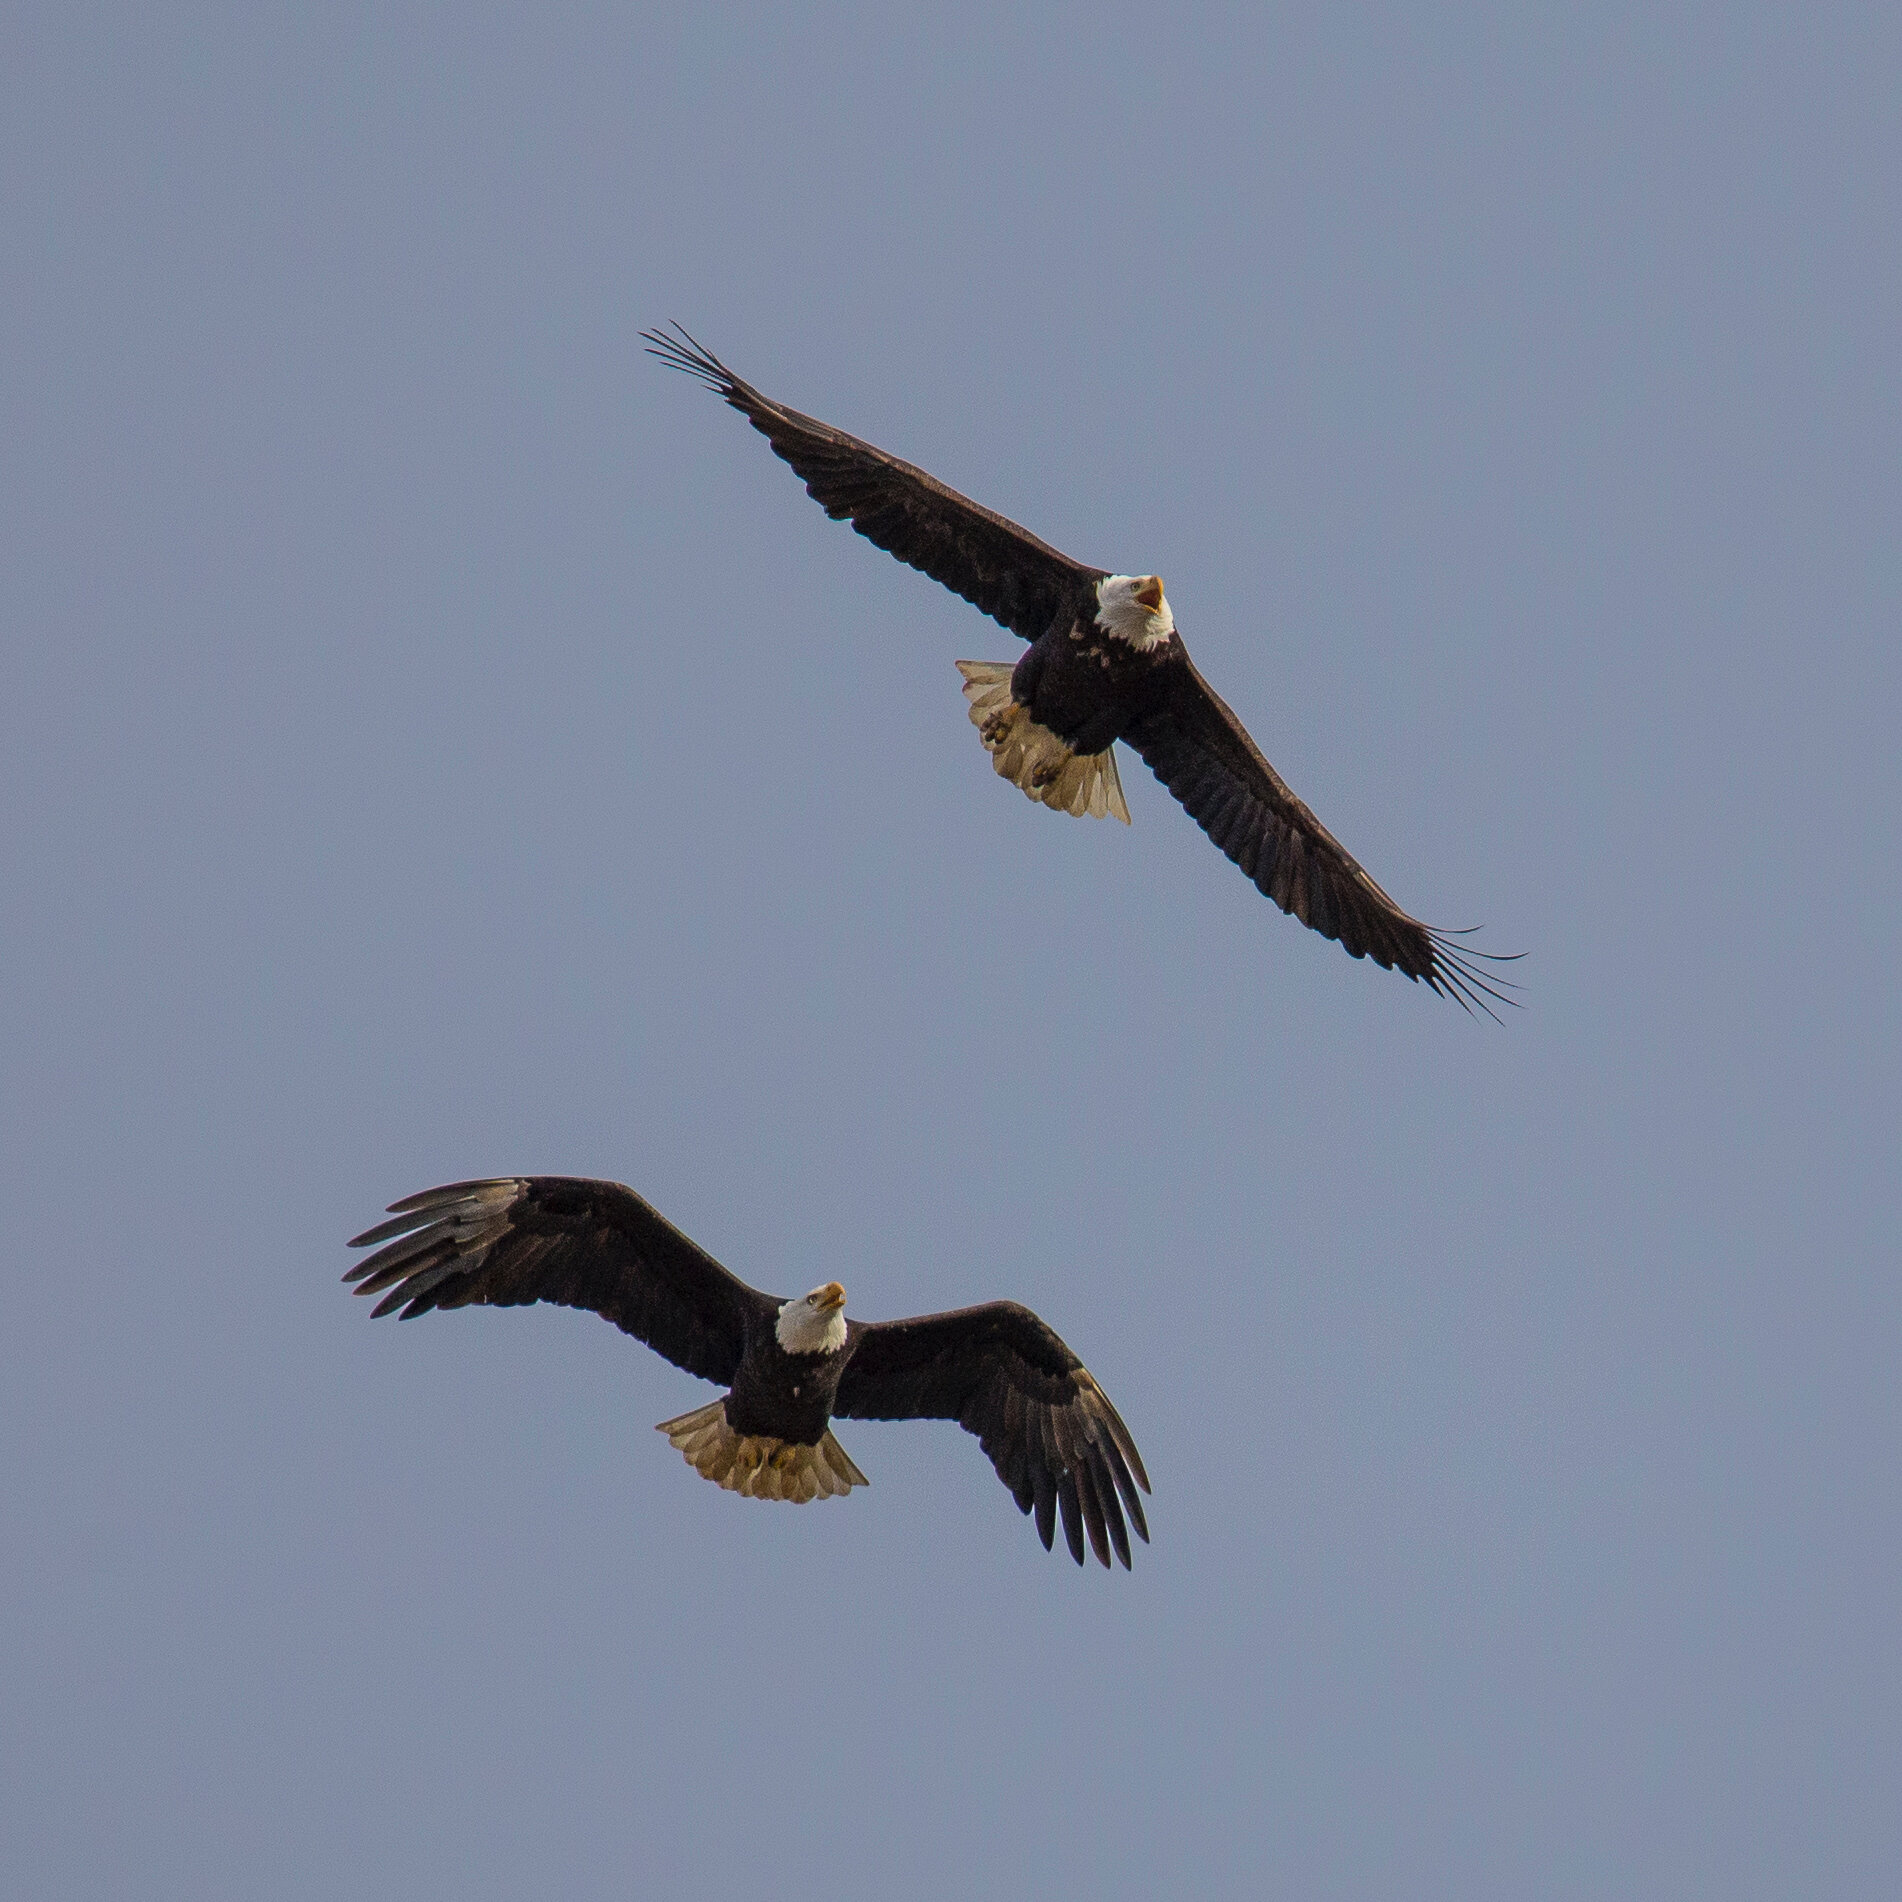  There were tons of bald eagles around, as is the norm this time of year. 